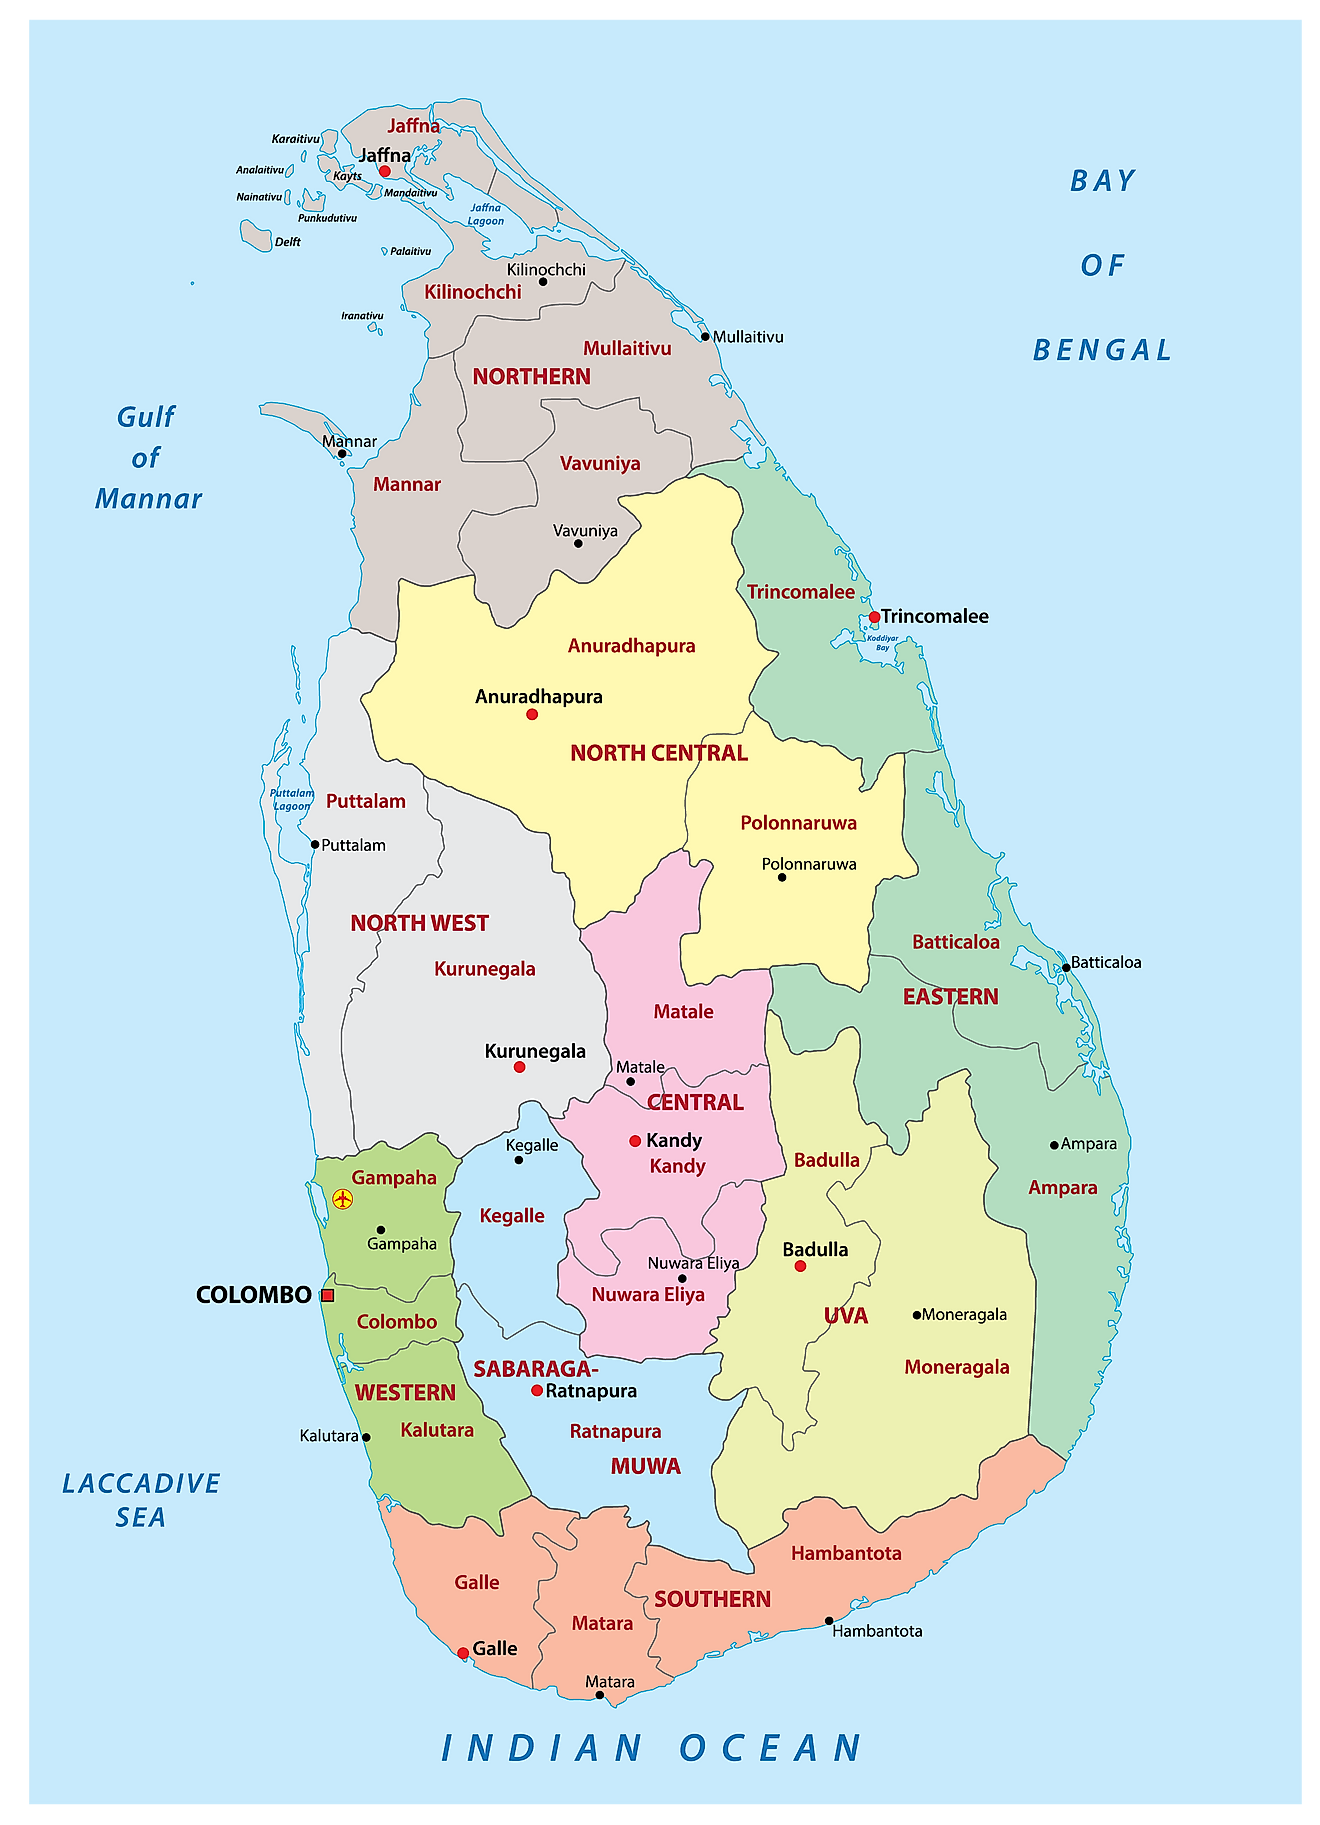 Political Map of Sri Lanka showing the 9 provinces, their capitals, and the national capital cities.